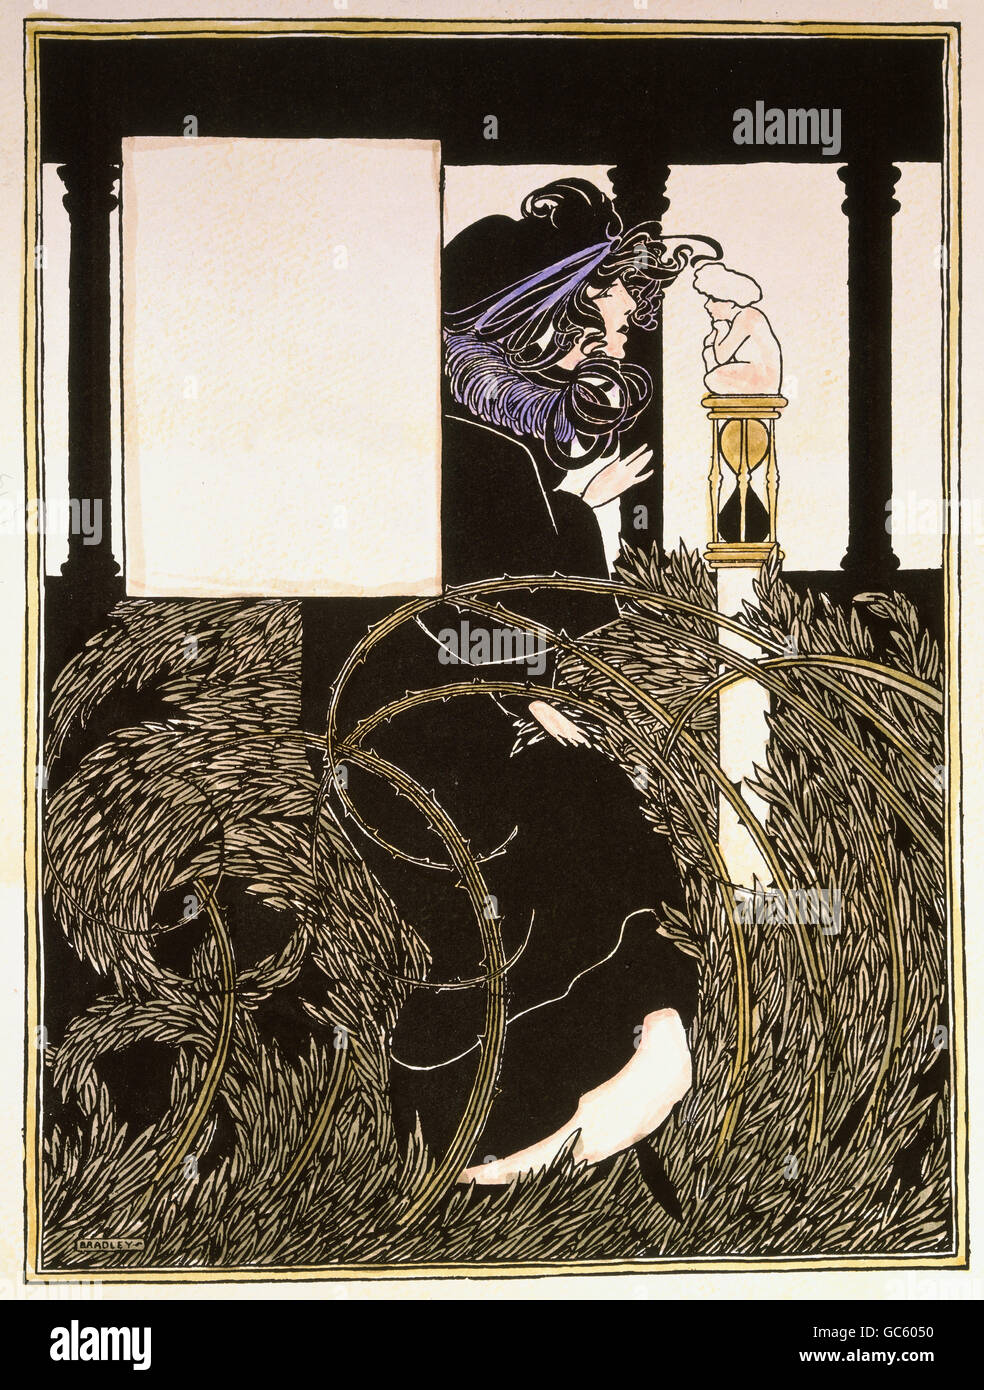 fine arts, Art Nouveau, print, illustration by W. H. Bradley, for 'The Chicago Sunday Tribune', from the magazine 'Studio', February 1895, private collection, Stock Photo